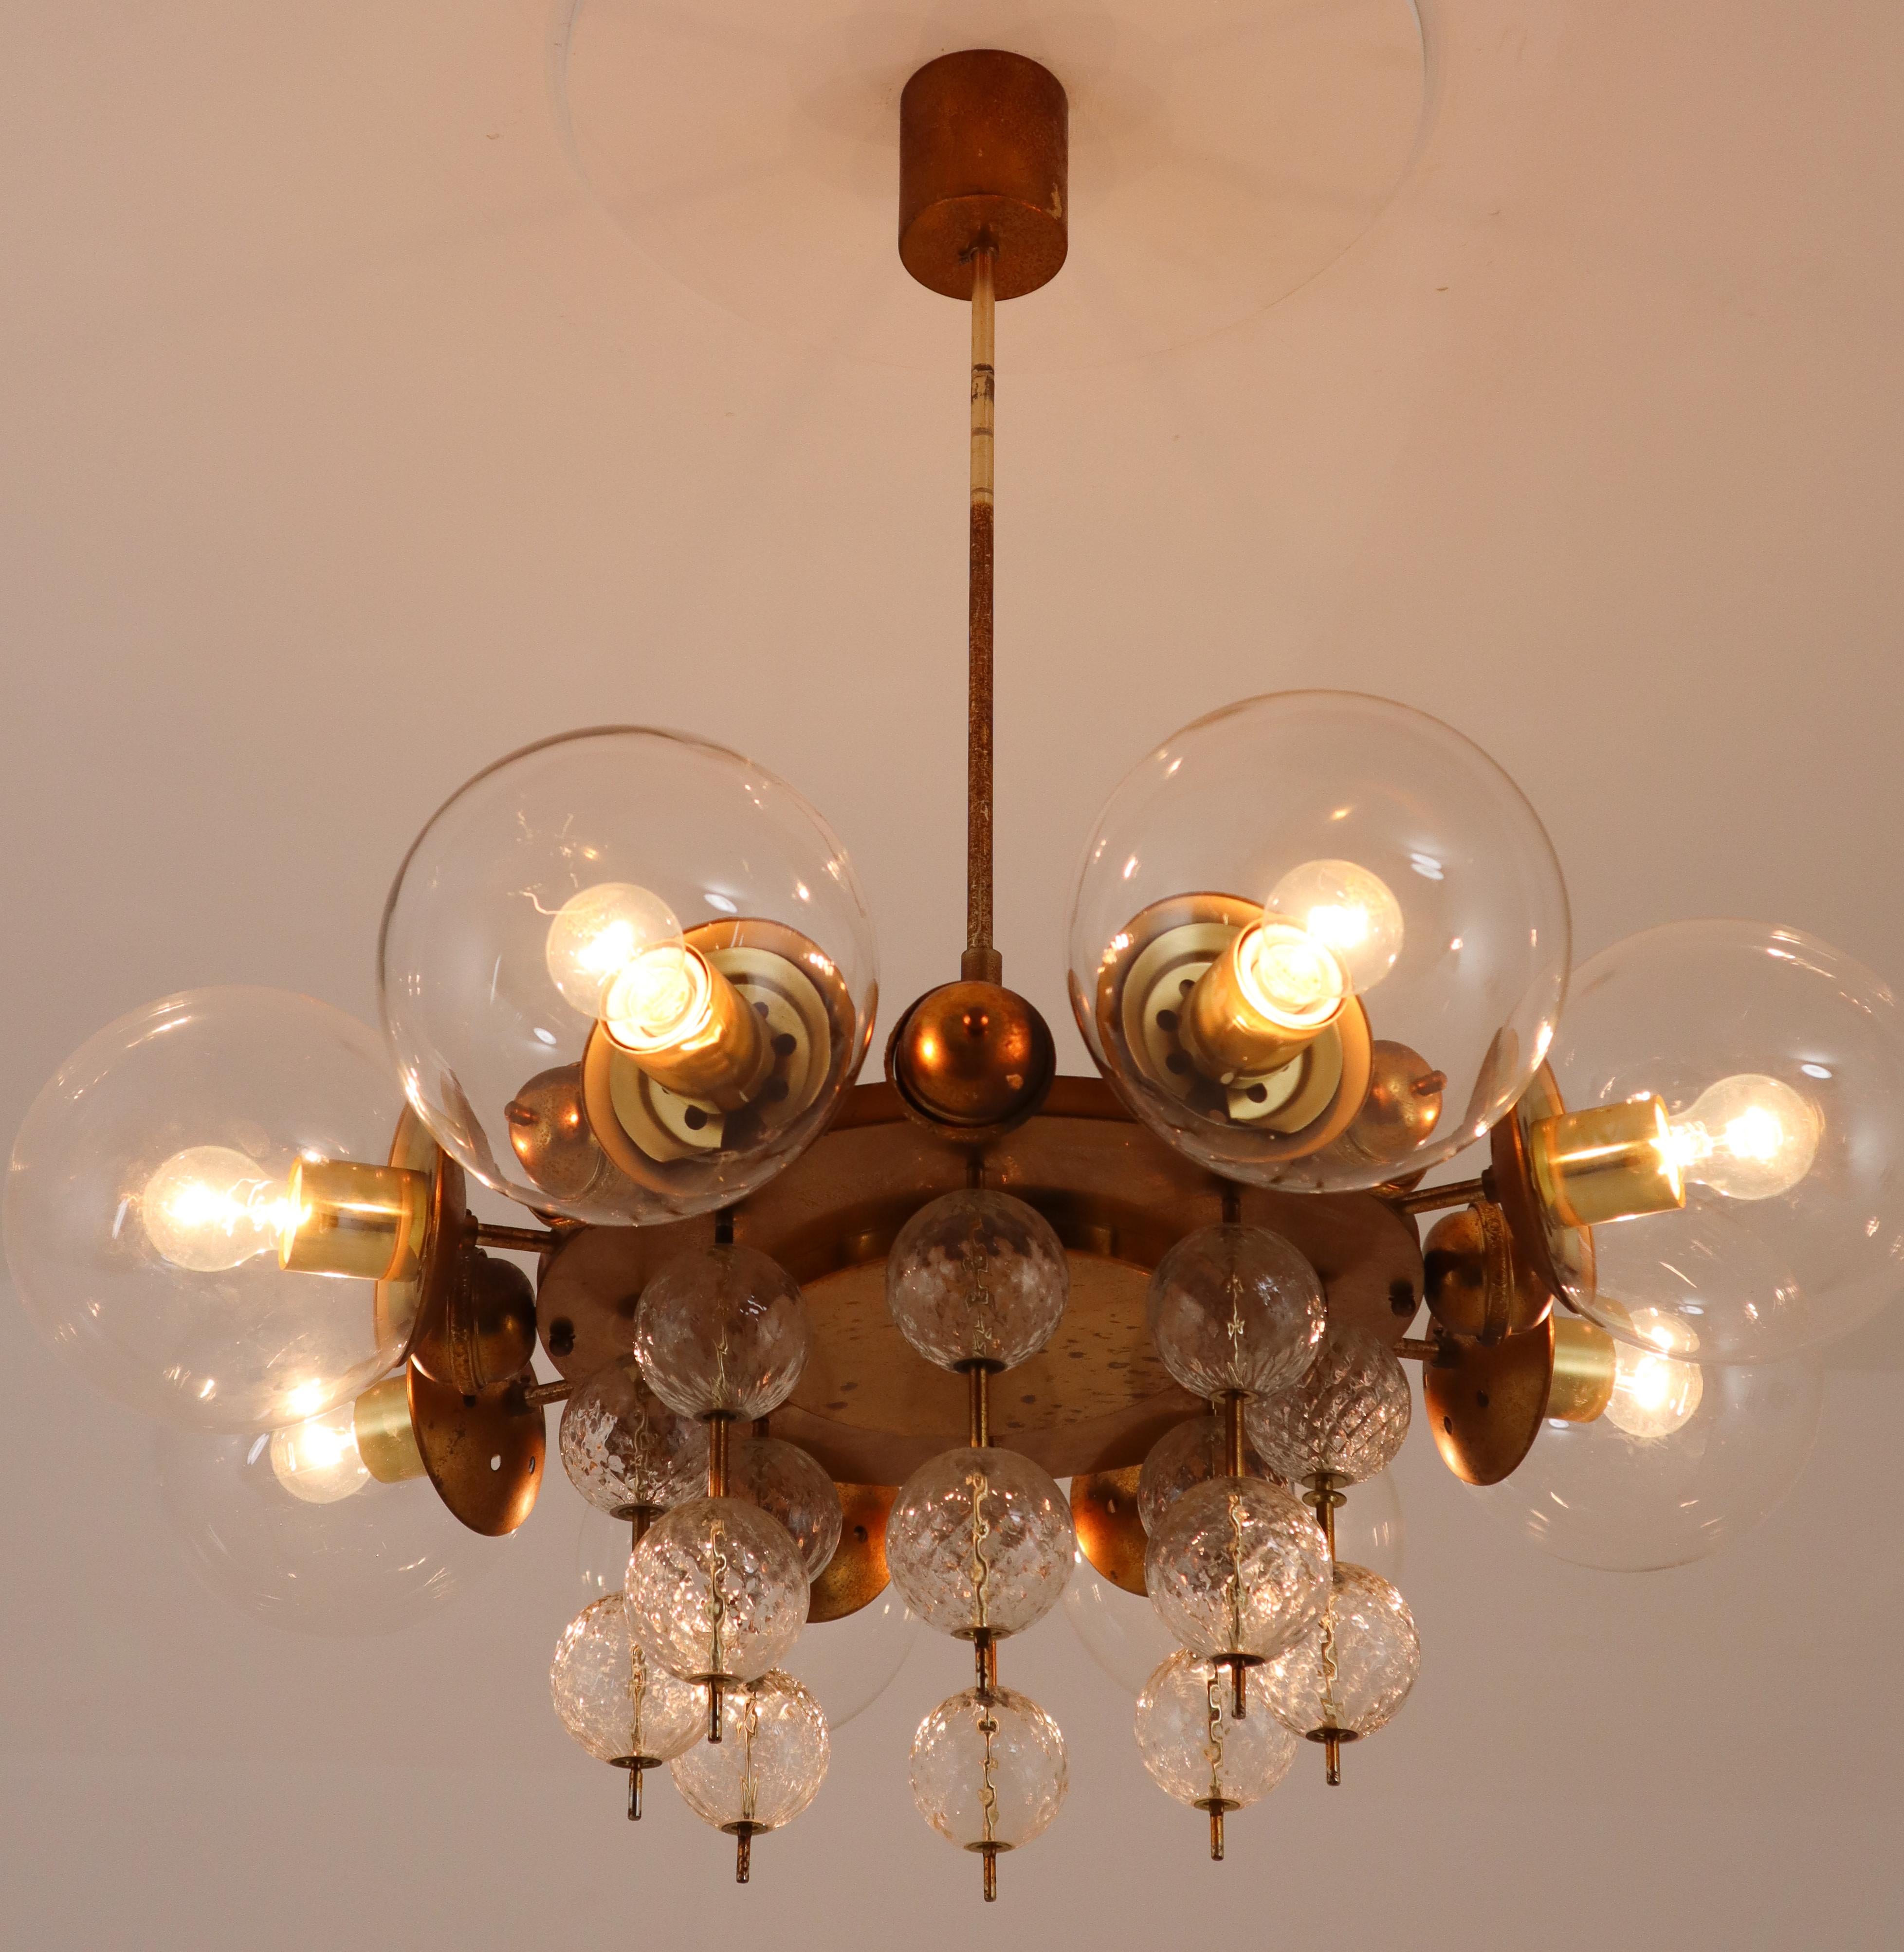 Mid-Century Modern Midcentury Chandelier with Patinated Brass Fixture, Europe, 1950s For Sale